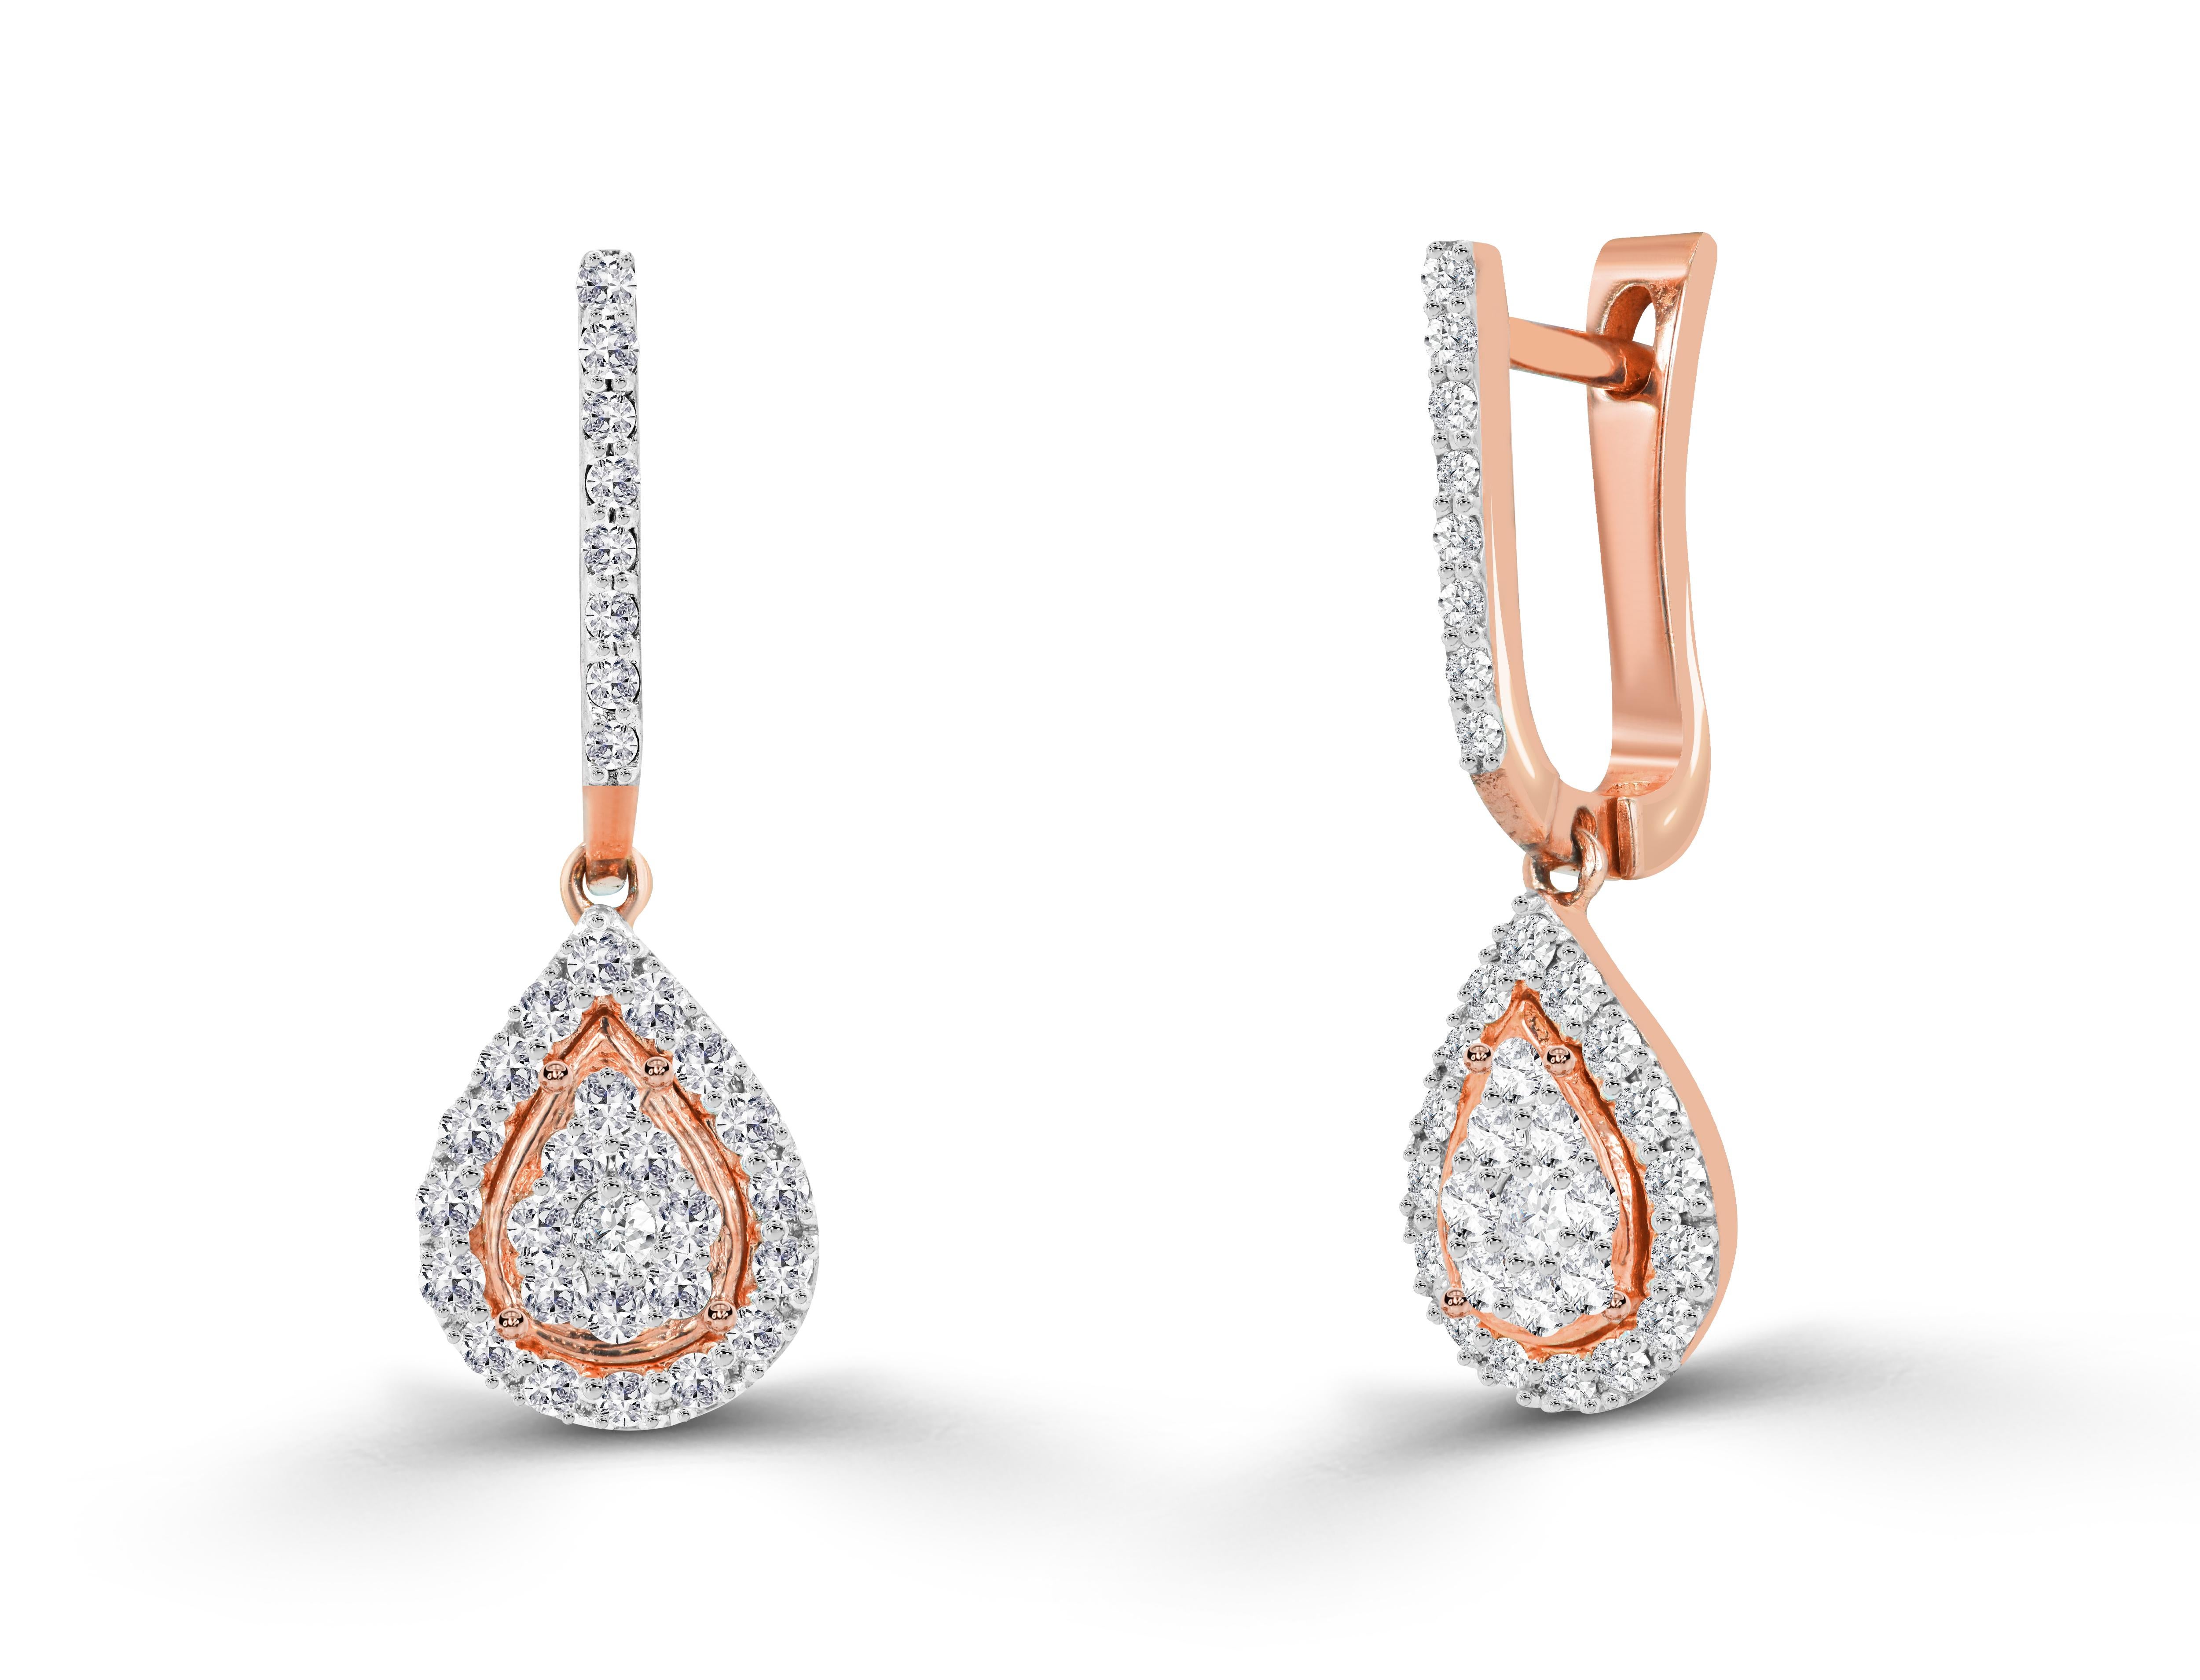 0.73 Ct Diamond Pear shaped Drop Earrings in 14K Gold, Round Brilliant cut diamond earrings, Natural Diamond Earrings, Cluster dangle earrings, Heavy End Earrings.

Jewels By Tarry presents to you a beautiful Earring collection with natural diamonds